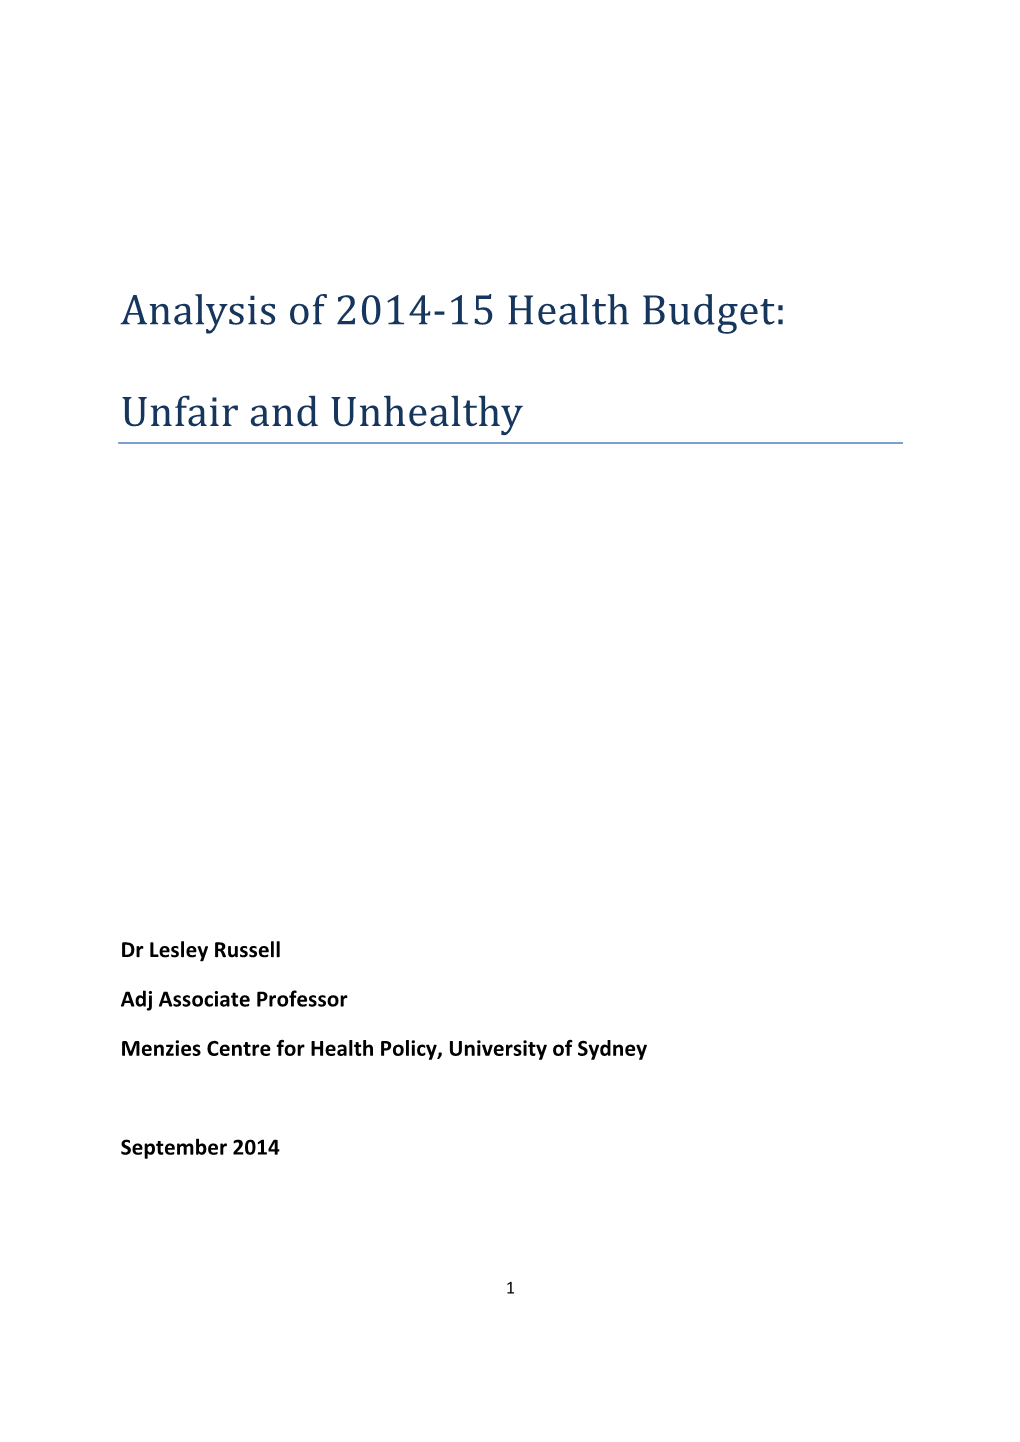 Analysis of 2014‐15 Health Budget: Unfair and Unhealthy